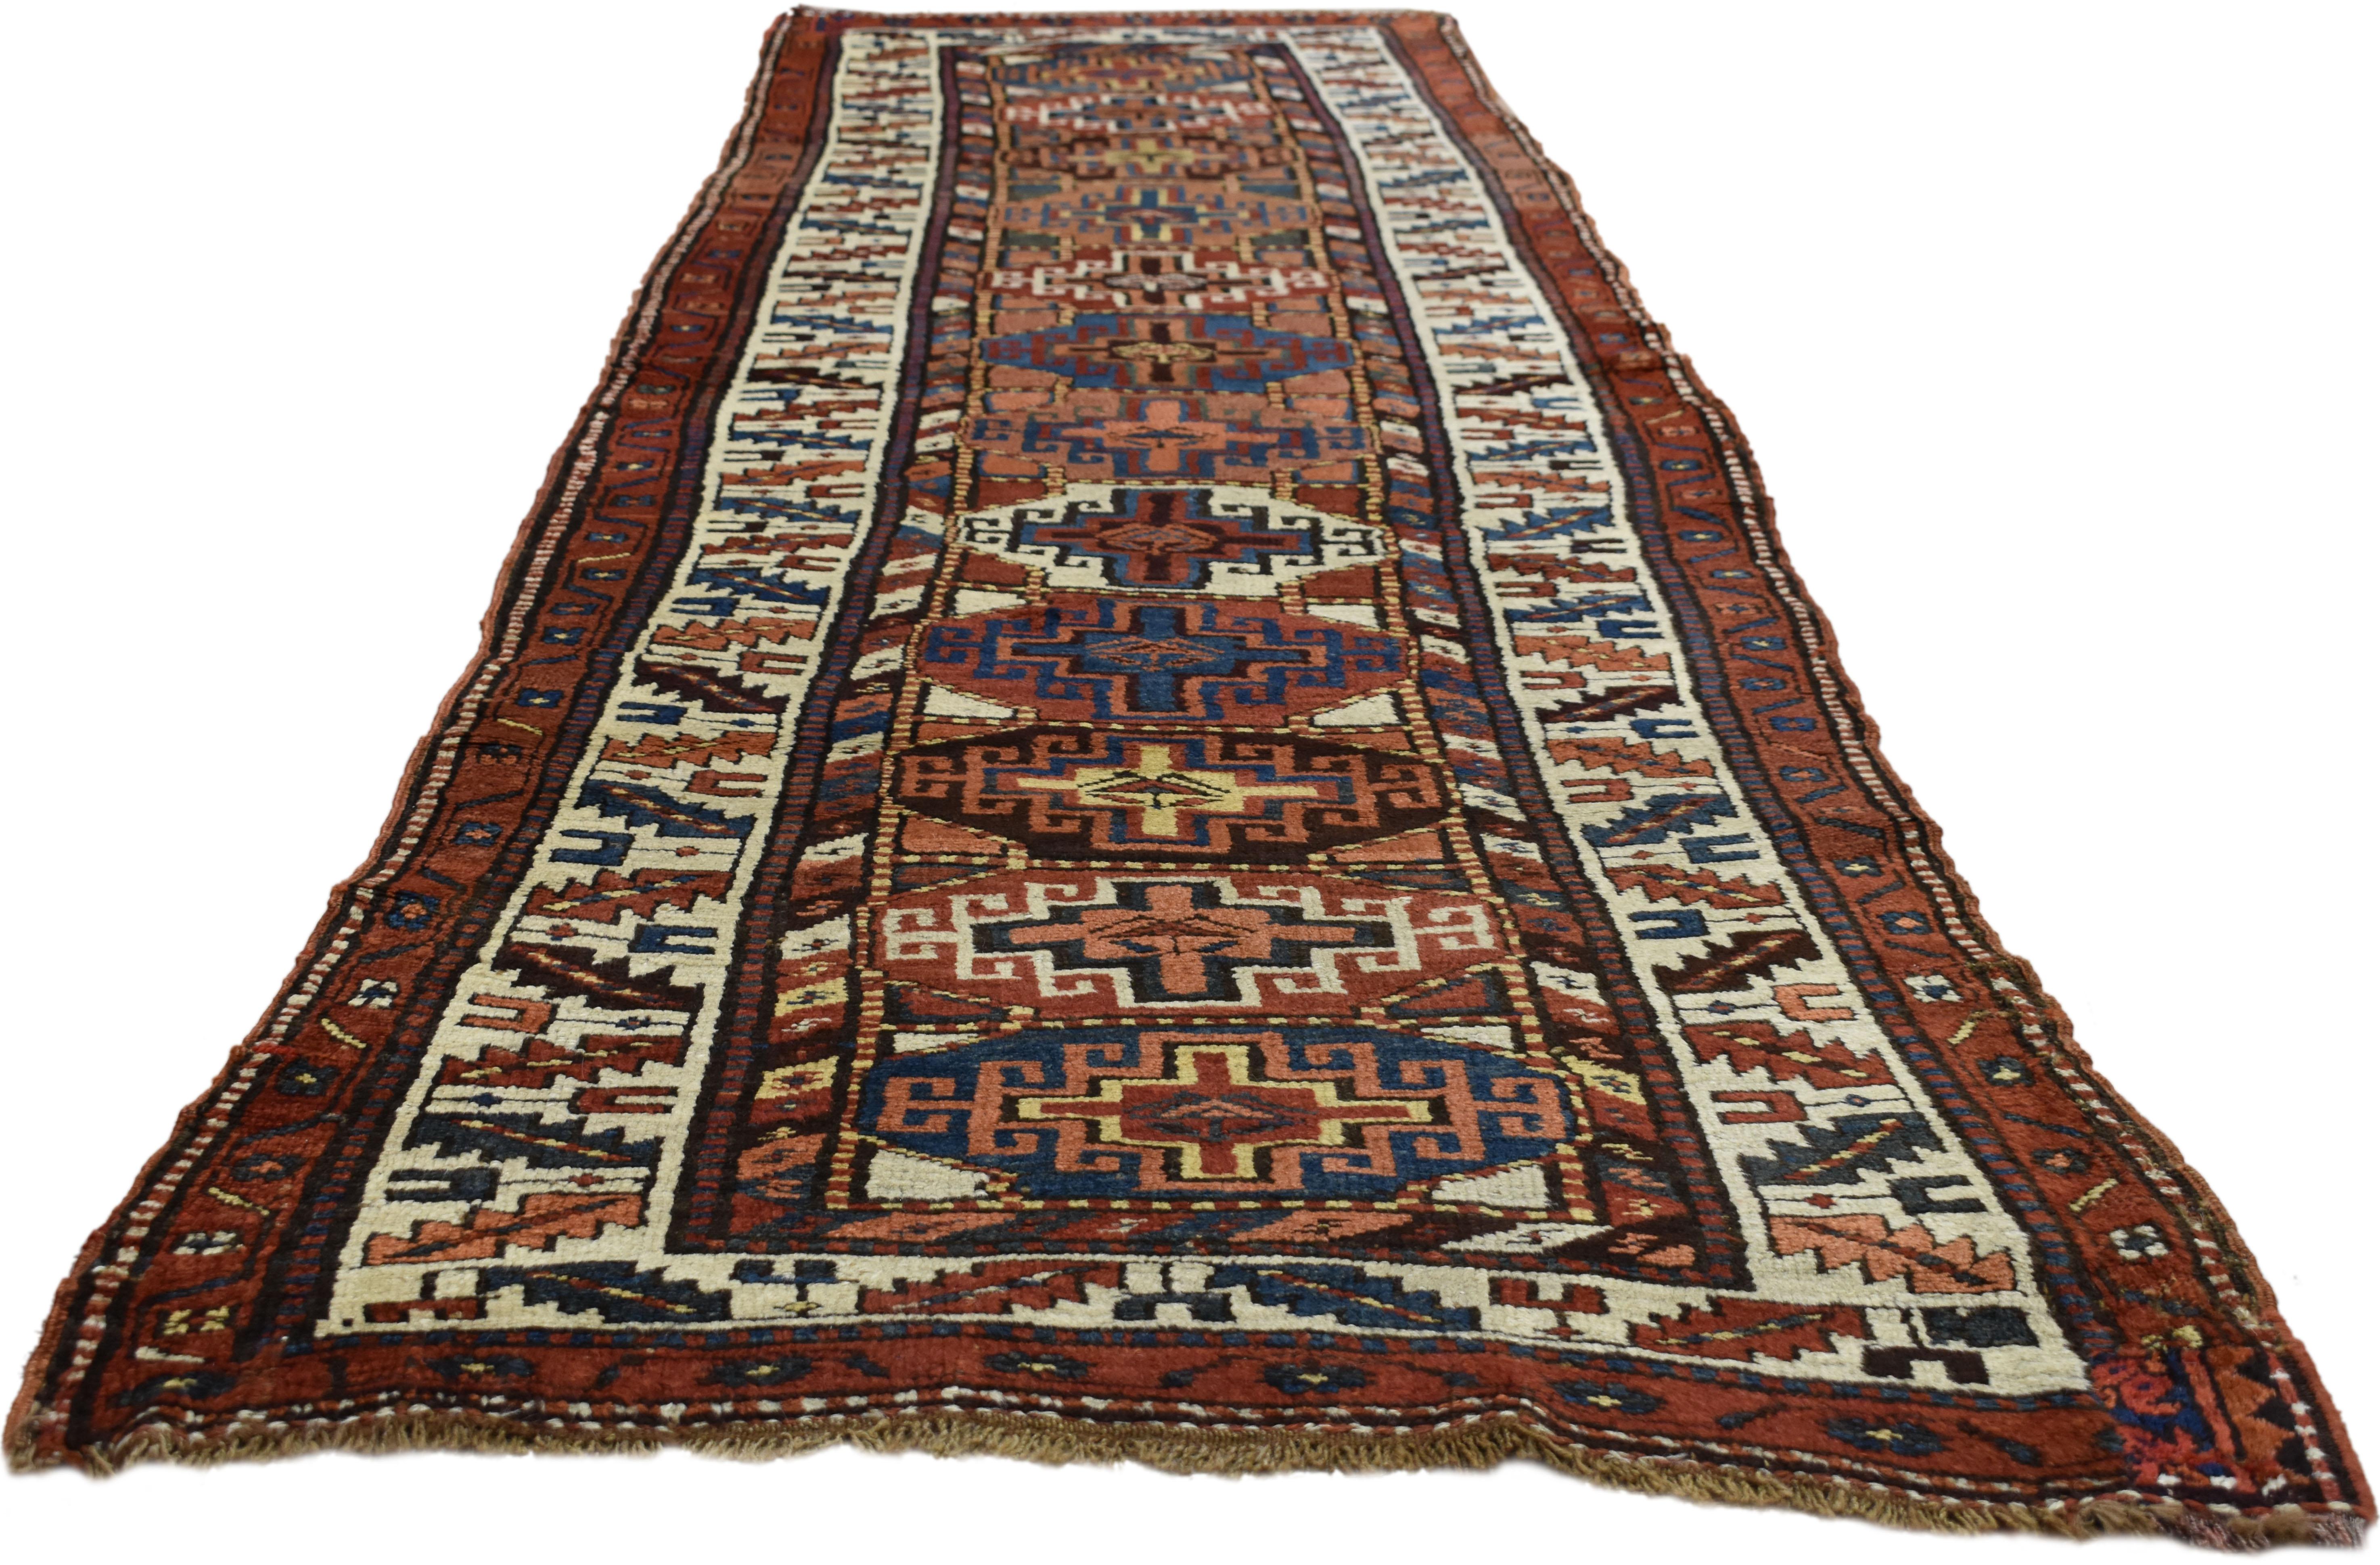 Tribal Antique Persian Kurdish Rug with Nomadic Raconteur Style, Hallway Runner For Sale